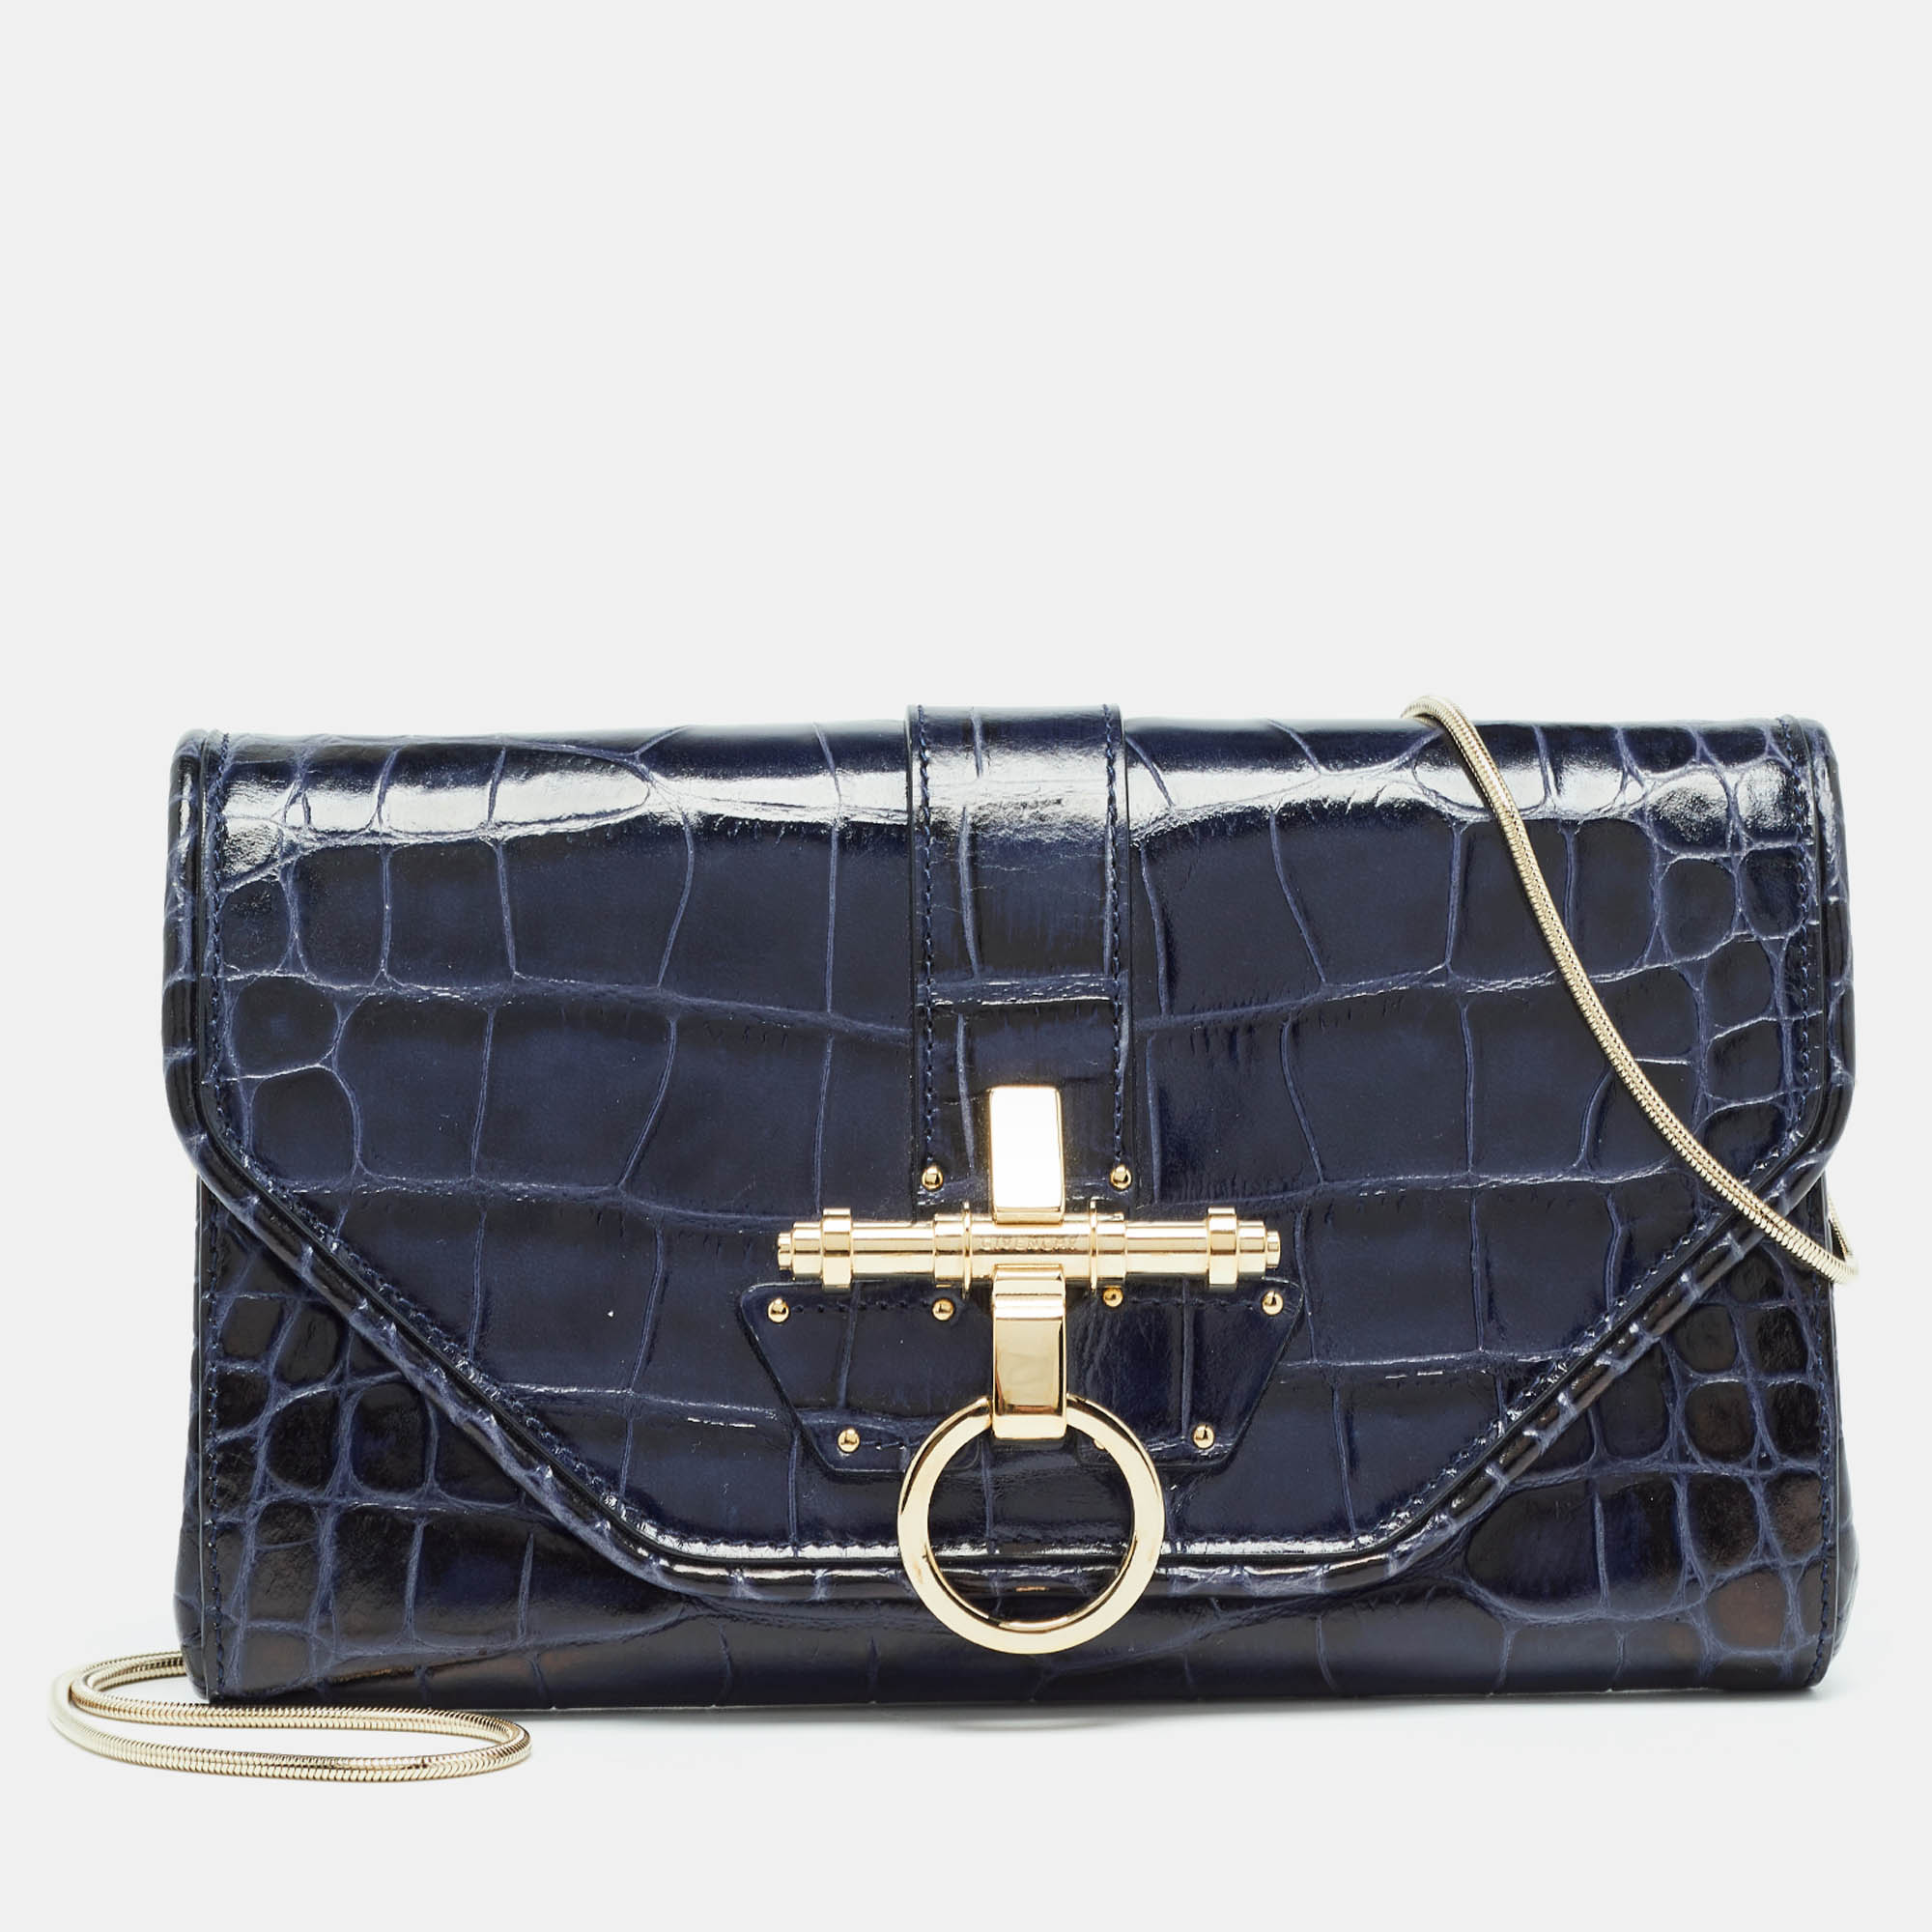 Givenchy blue/black croc embossed glossy leather obsedia chain clutch